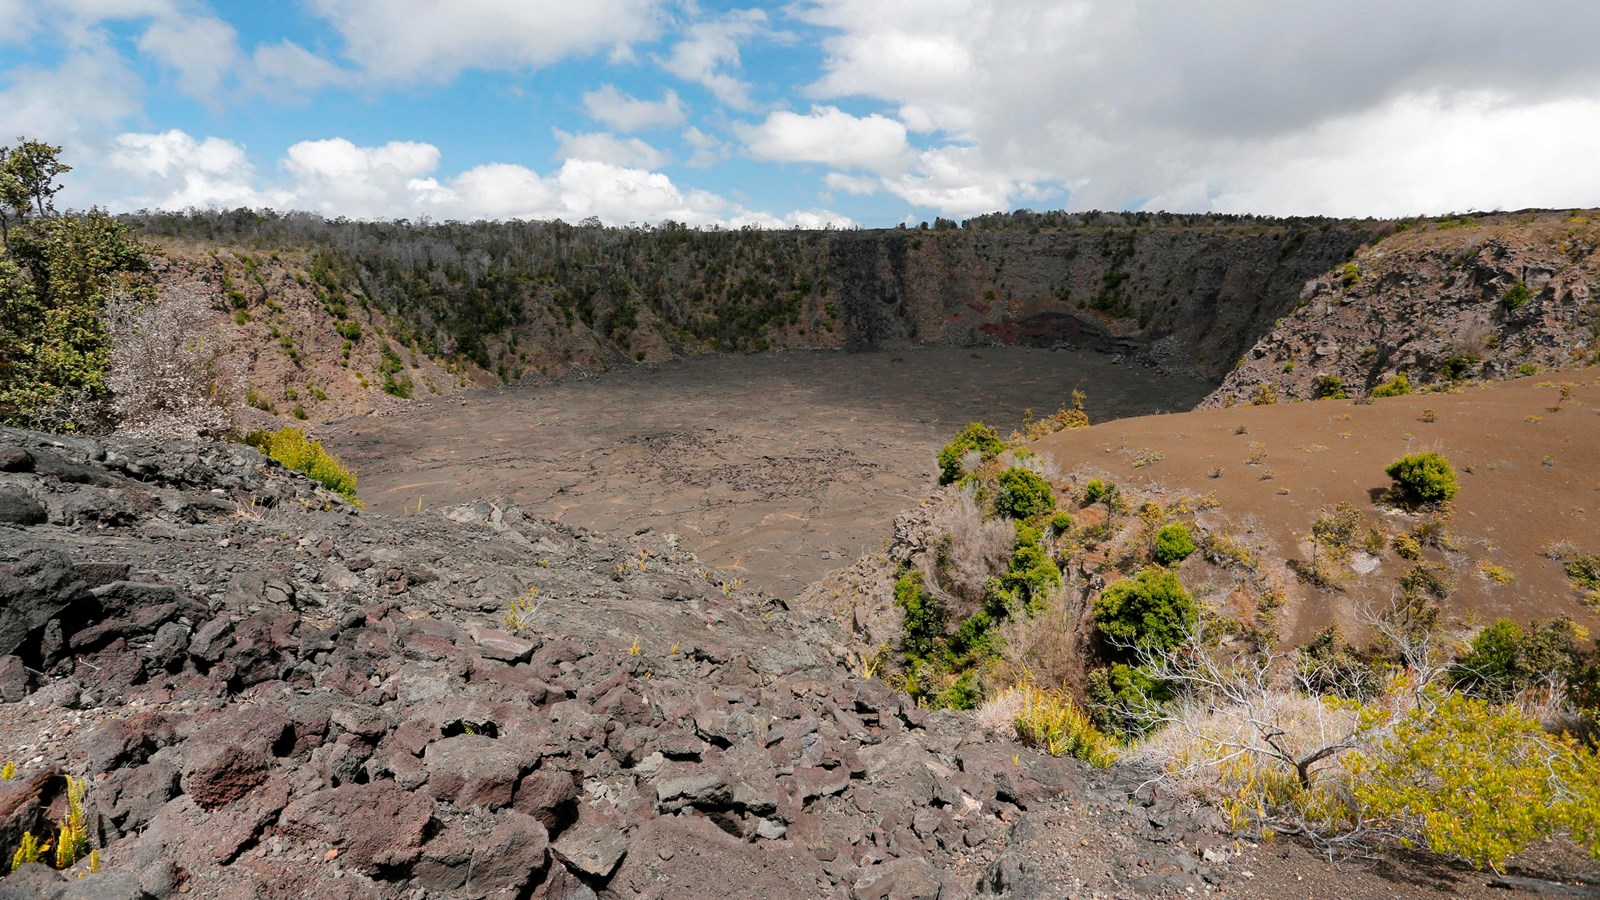 A volcanic pit crater surrounded by cinders and small trees.